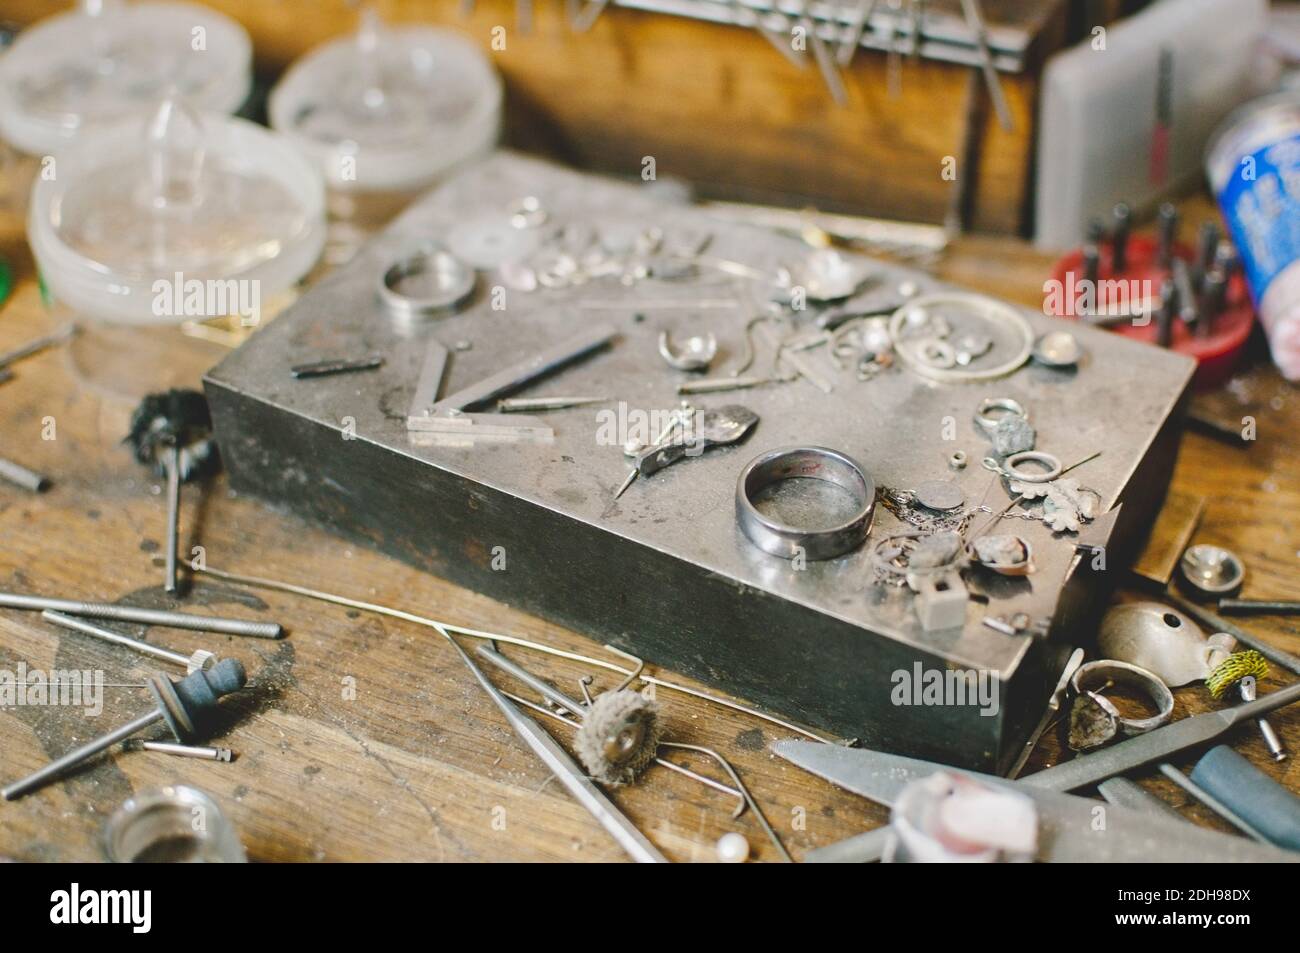 Jewelry making tools on workbench in workshop Stock Photo